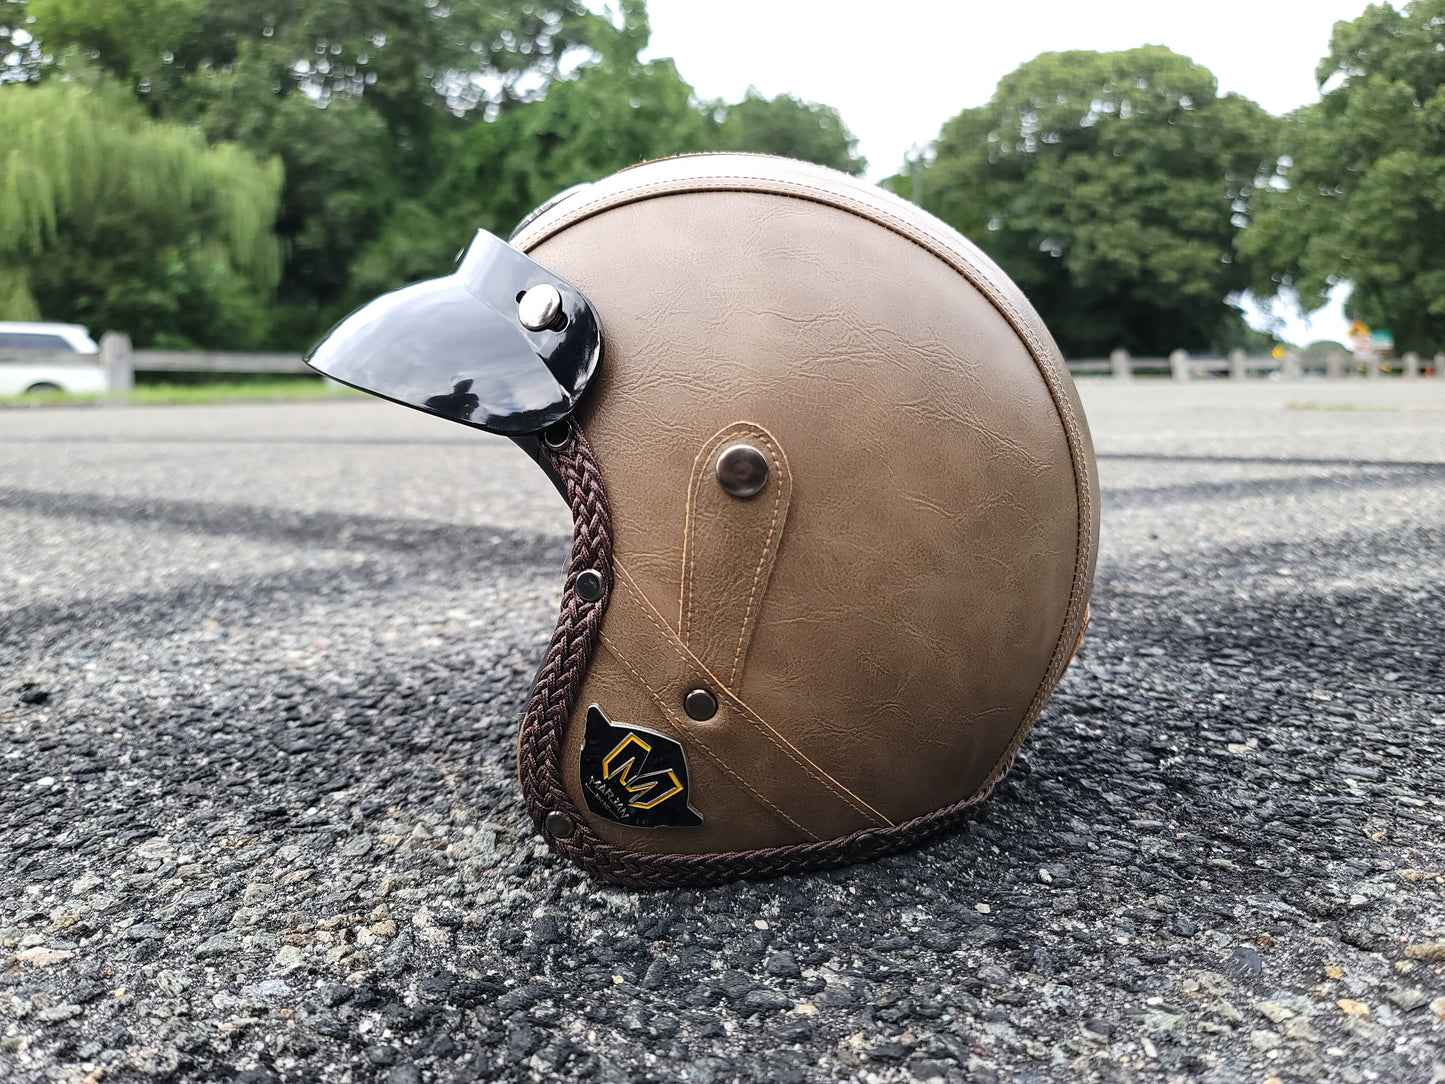 Marjan NYC Classic ABS Open Face Motorcycle Retro Vintage Leather Helmet